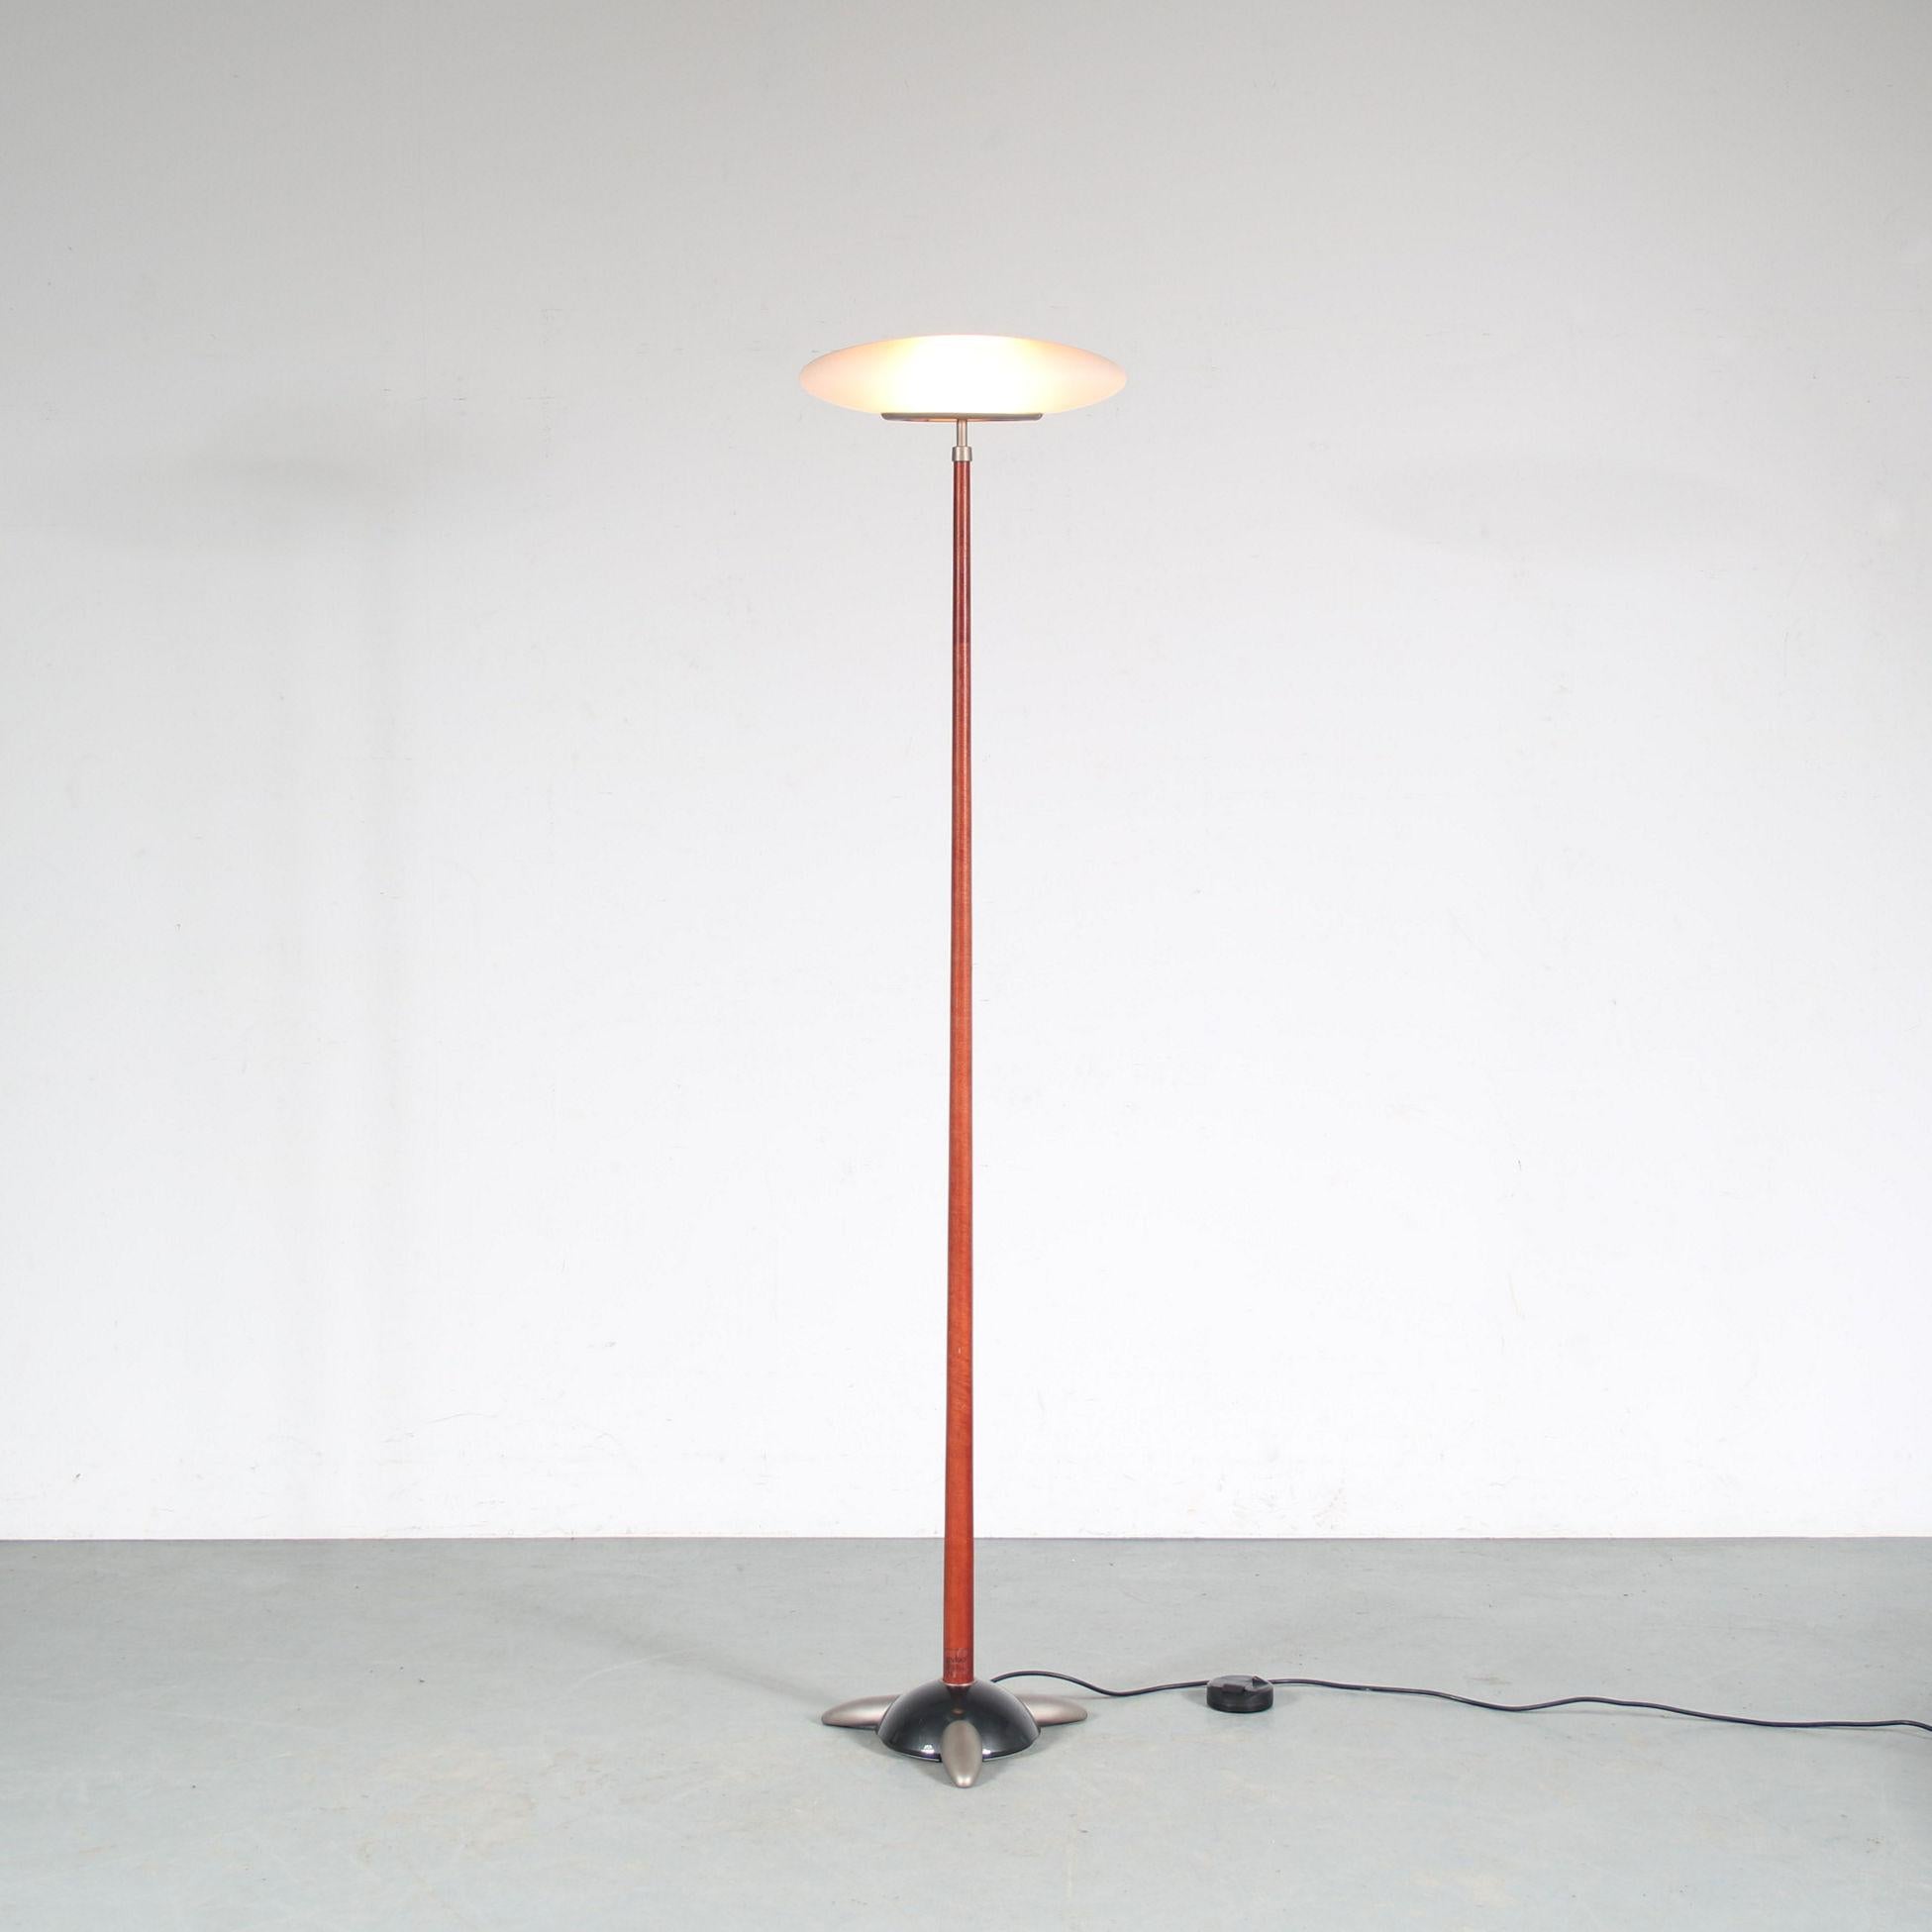 PAO Floor Lamp by Matteo Thun for Arteluce, Italy 1990 In Good Condition For Sale In Amsterdam, NL